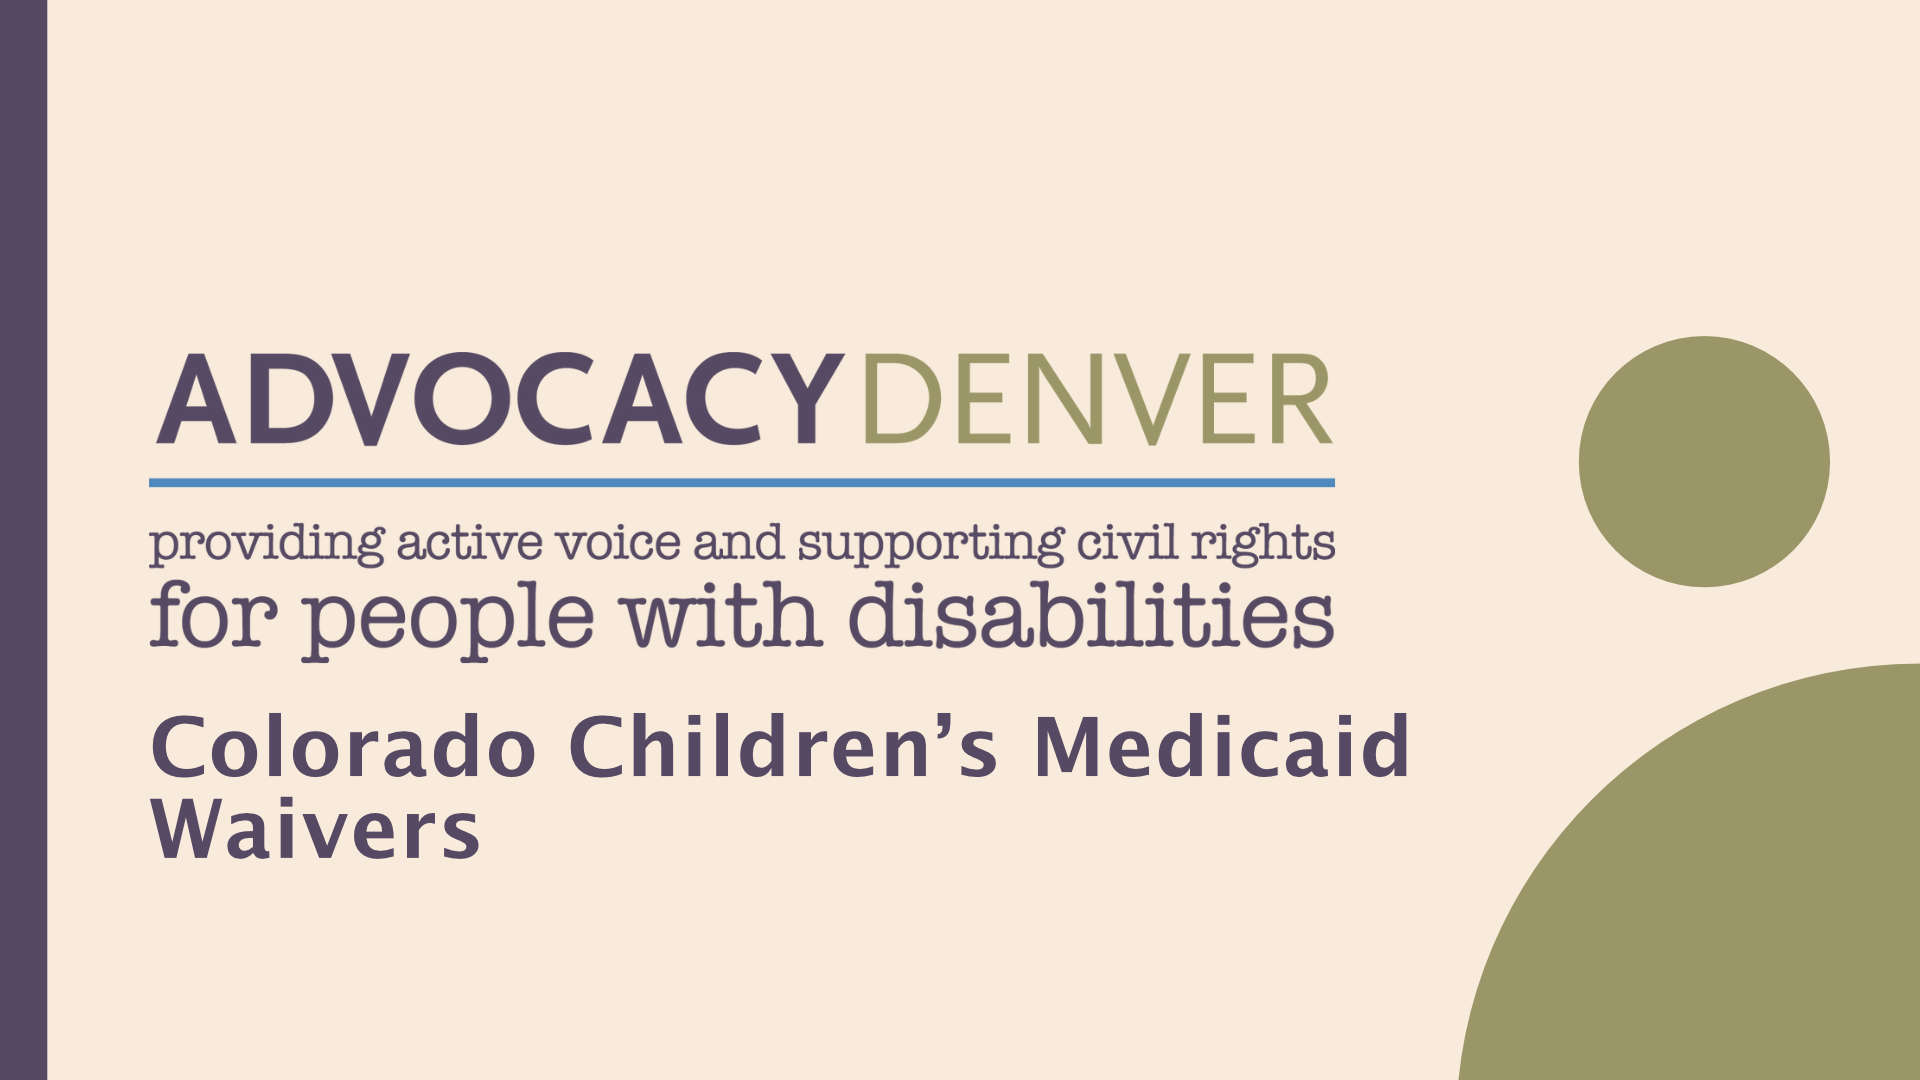 Colorado Children’s Medicaid Waivers